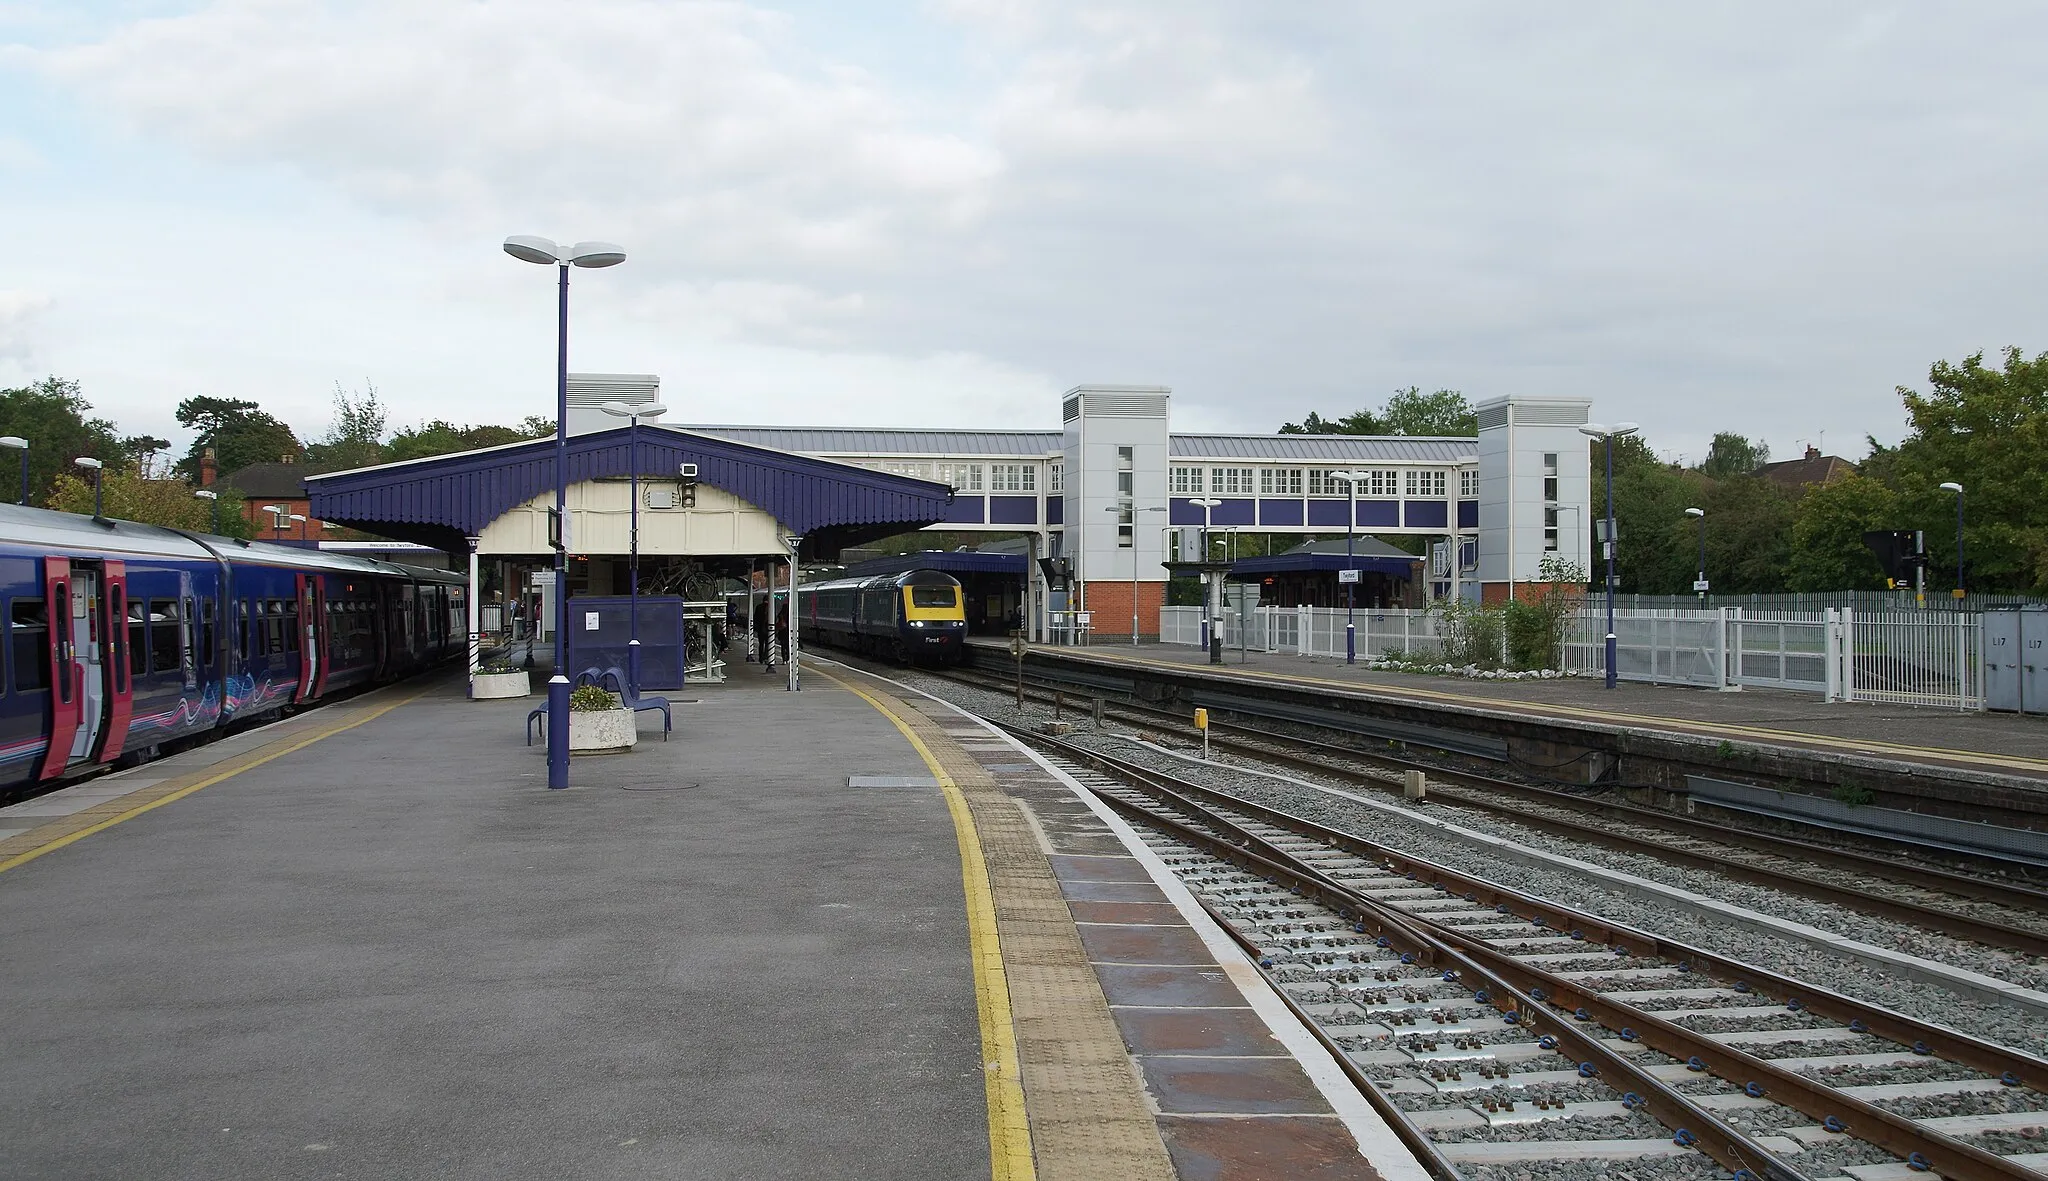 Photo showing: A westbound First Great Western HST set cruises through the slow platforms at Twyford railway station, while on the left class 165 "Network Turbo" DMU 165104 stands with a Henley service.